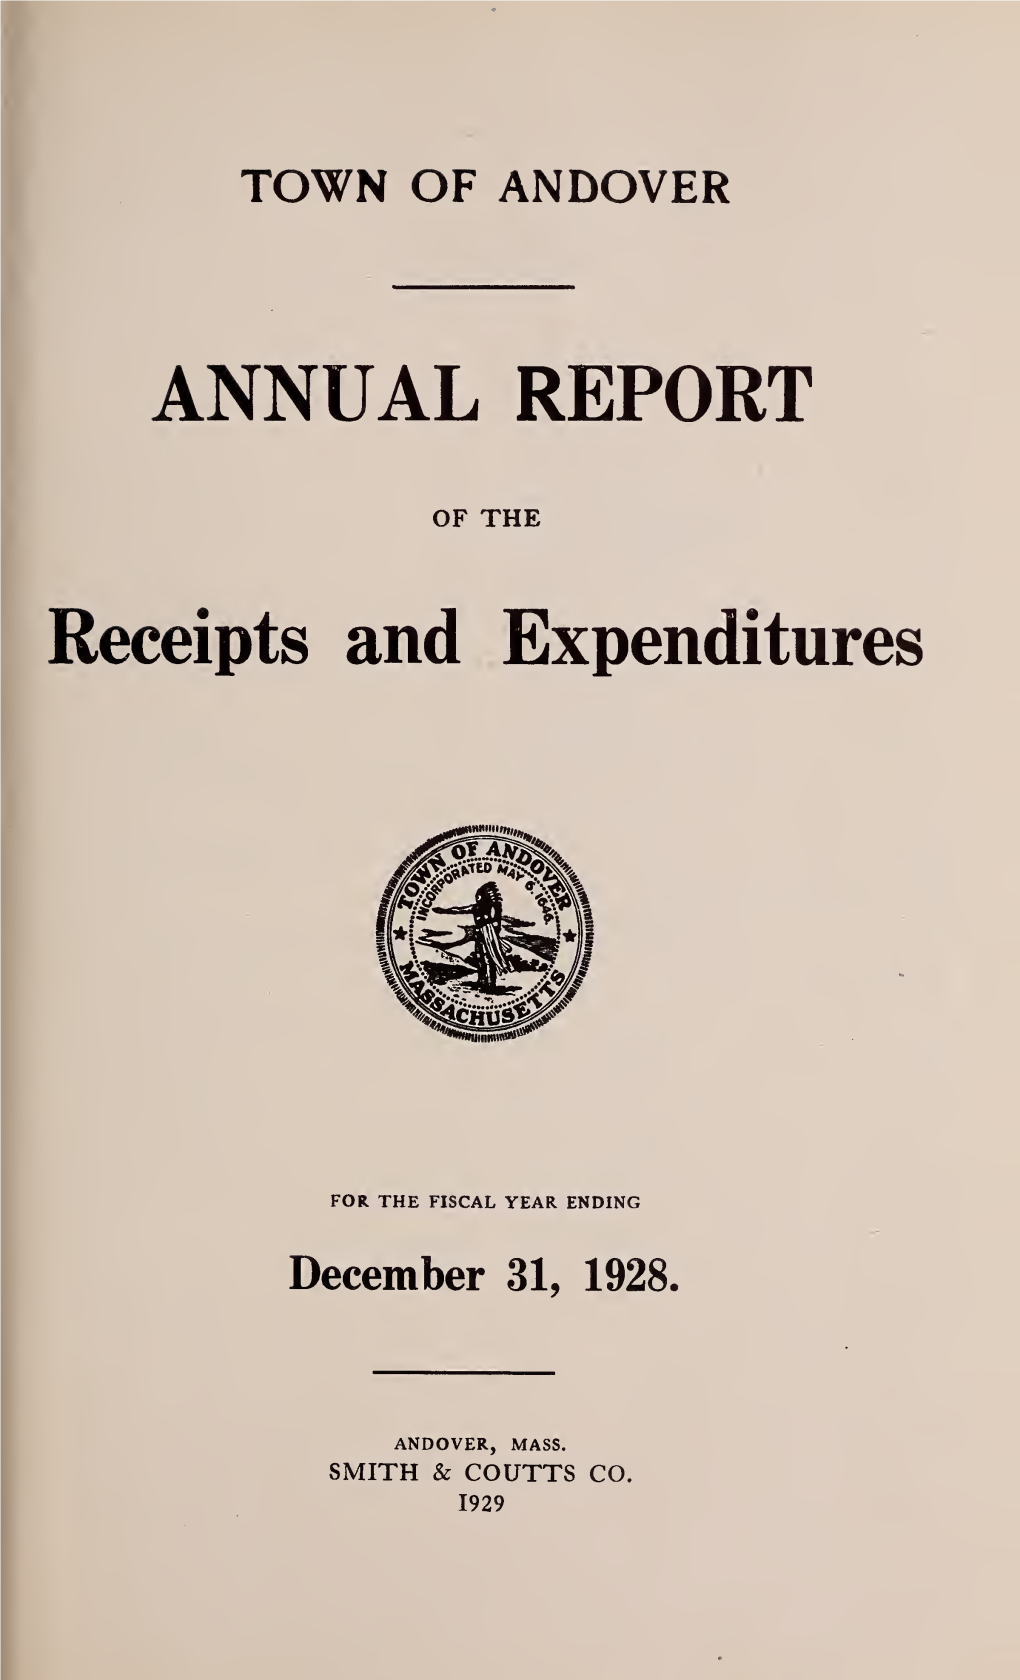 Annual Report of the Town of Andover